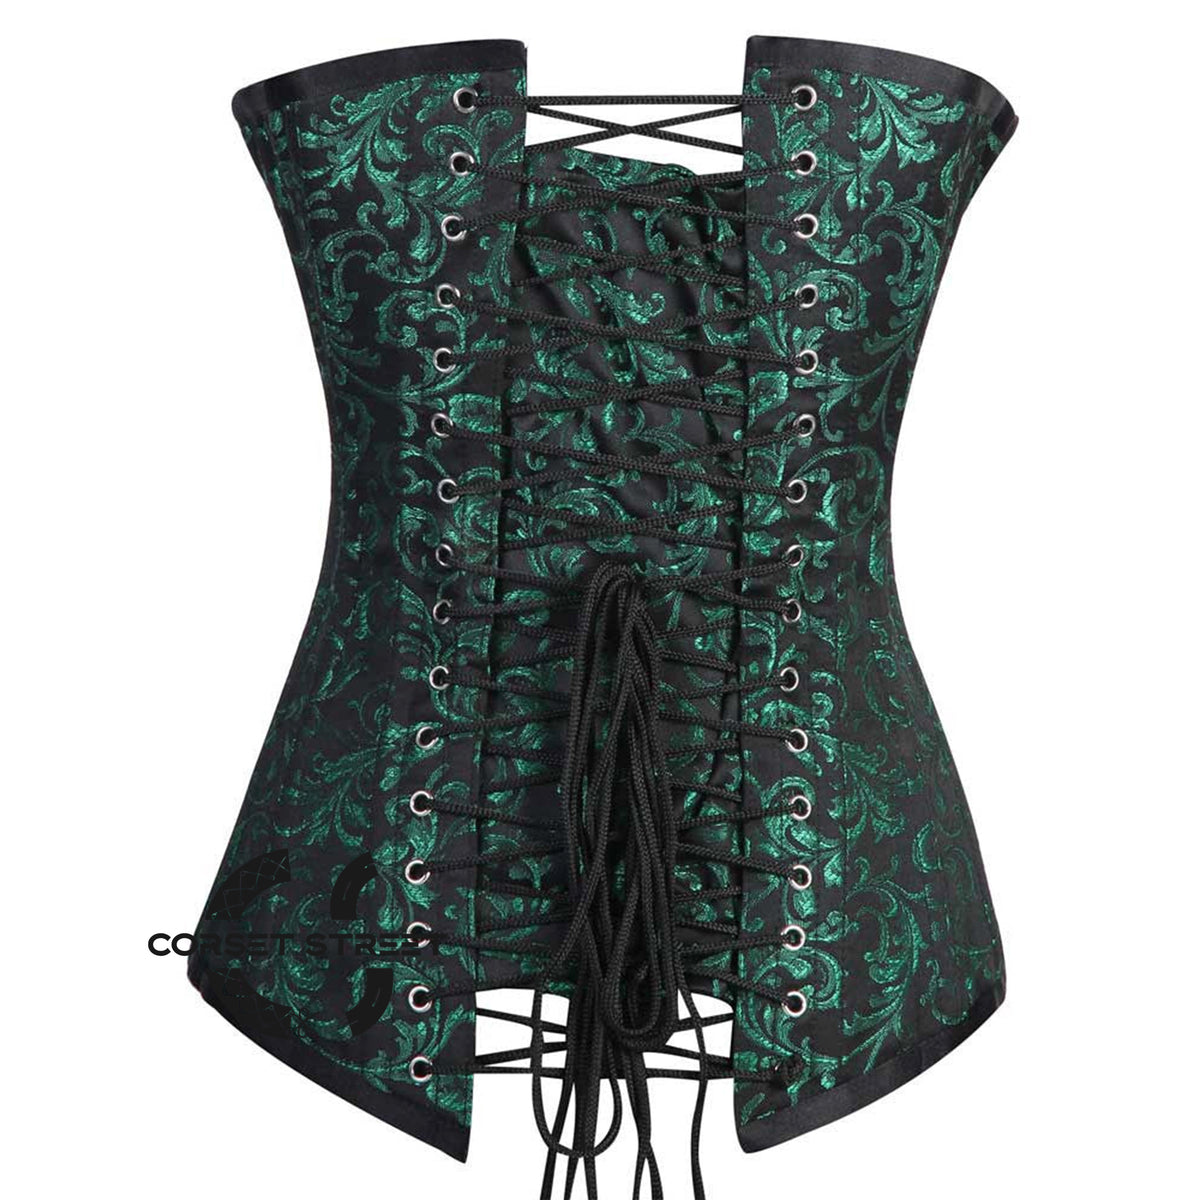 Black And Green Brocade Longline Front zipper Gothic Corset Burlesque Plus Size Overbust Costume